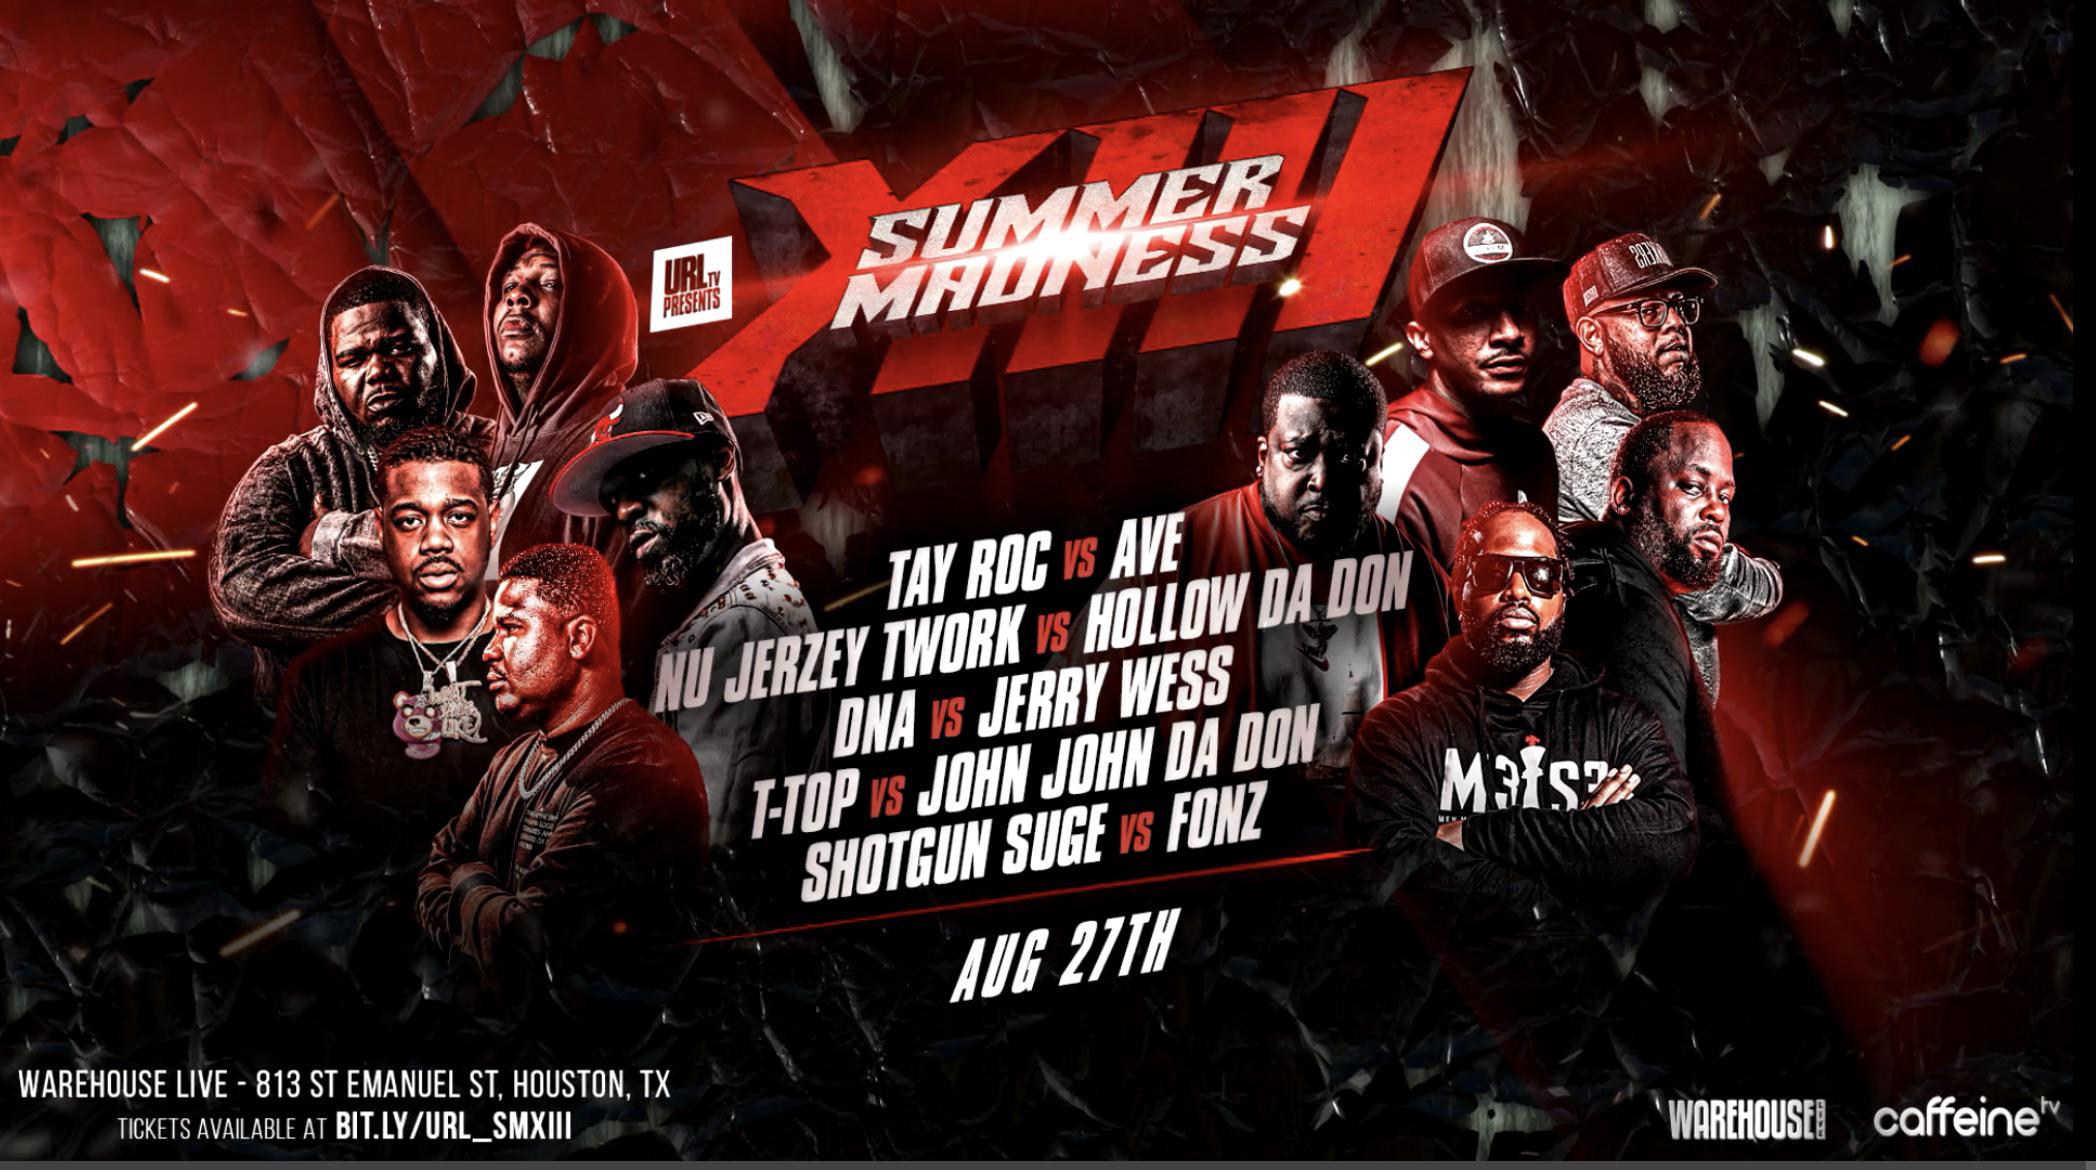 URL Announces ‘Summer Madness XIII’ to Return to Caffeine on Aug. 27